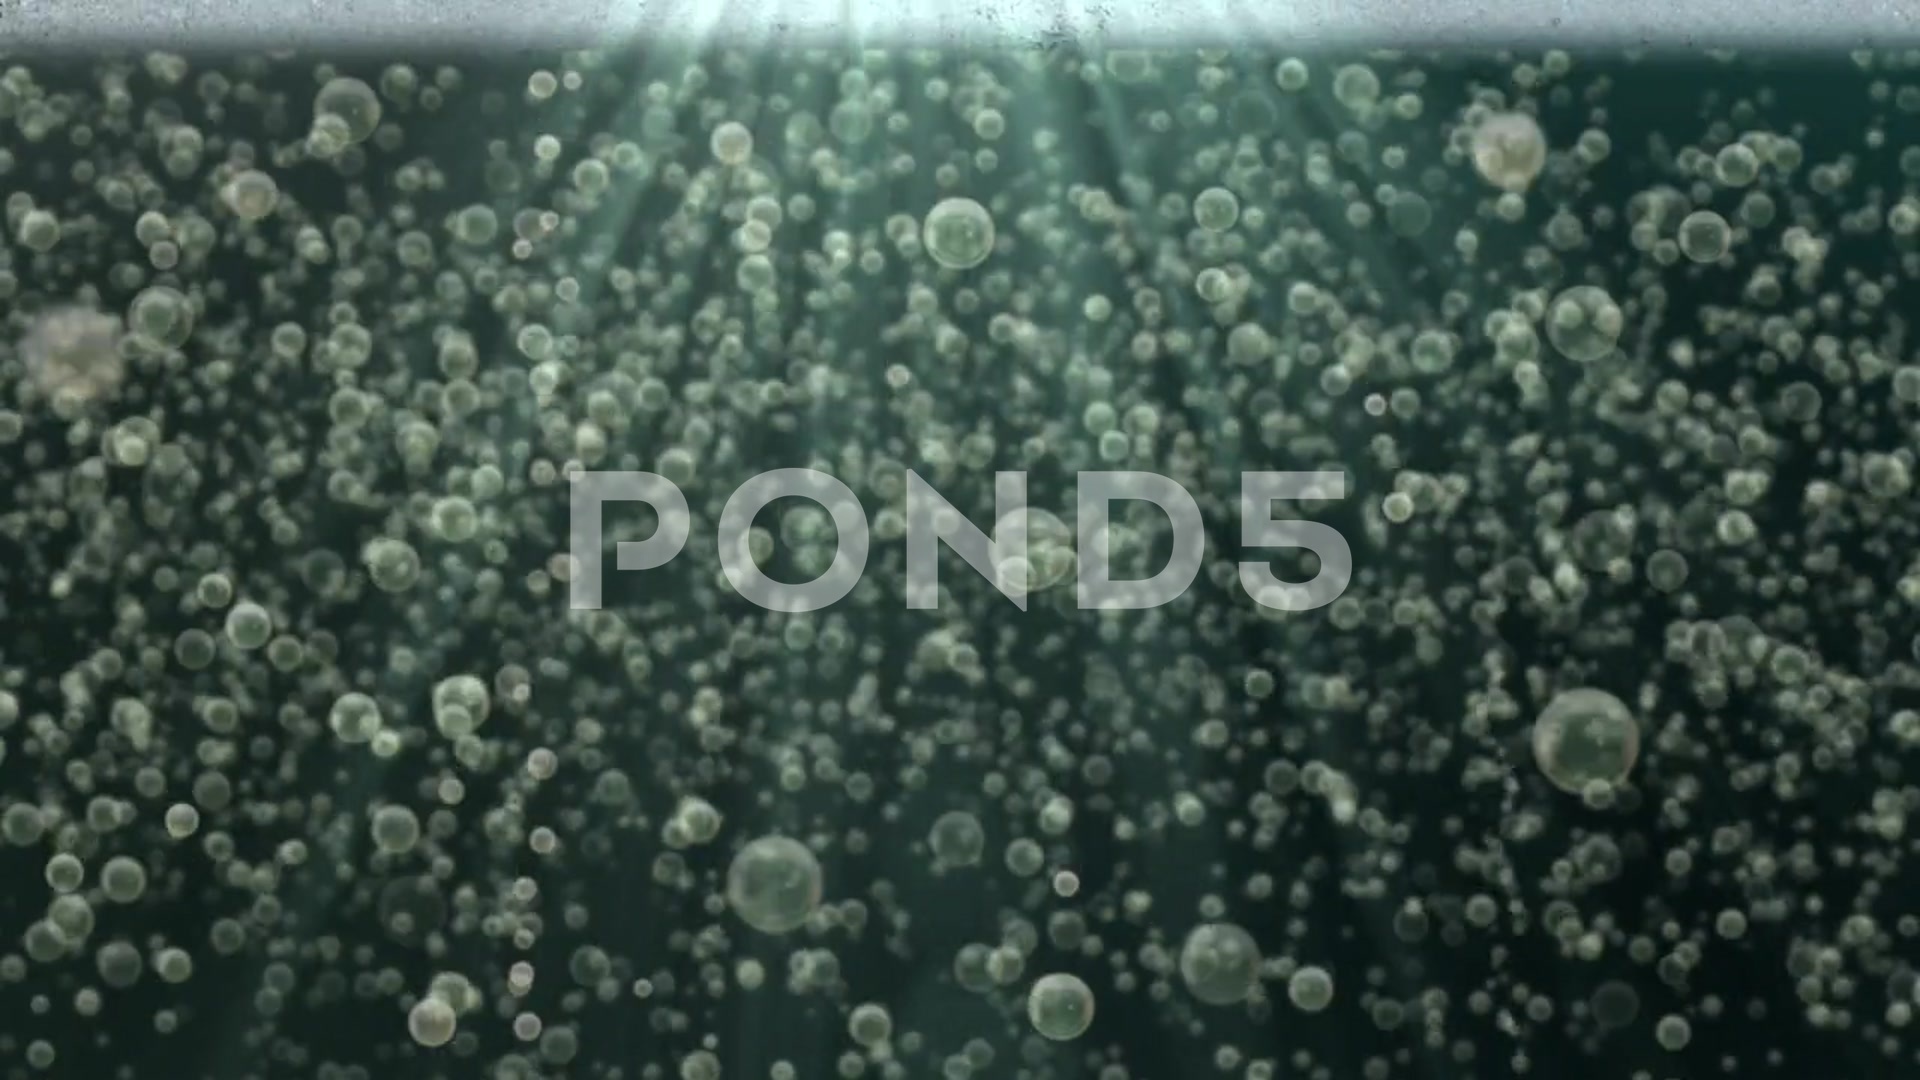 After Effects Project - Pond5 Logo Reveal Underwater 57110669